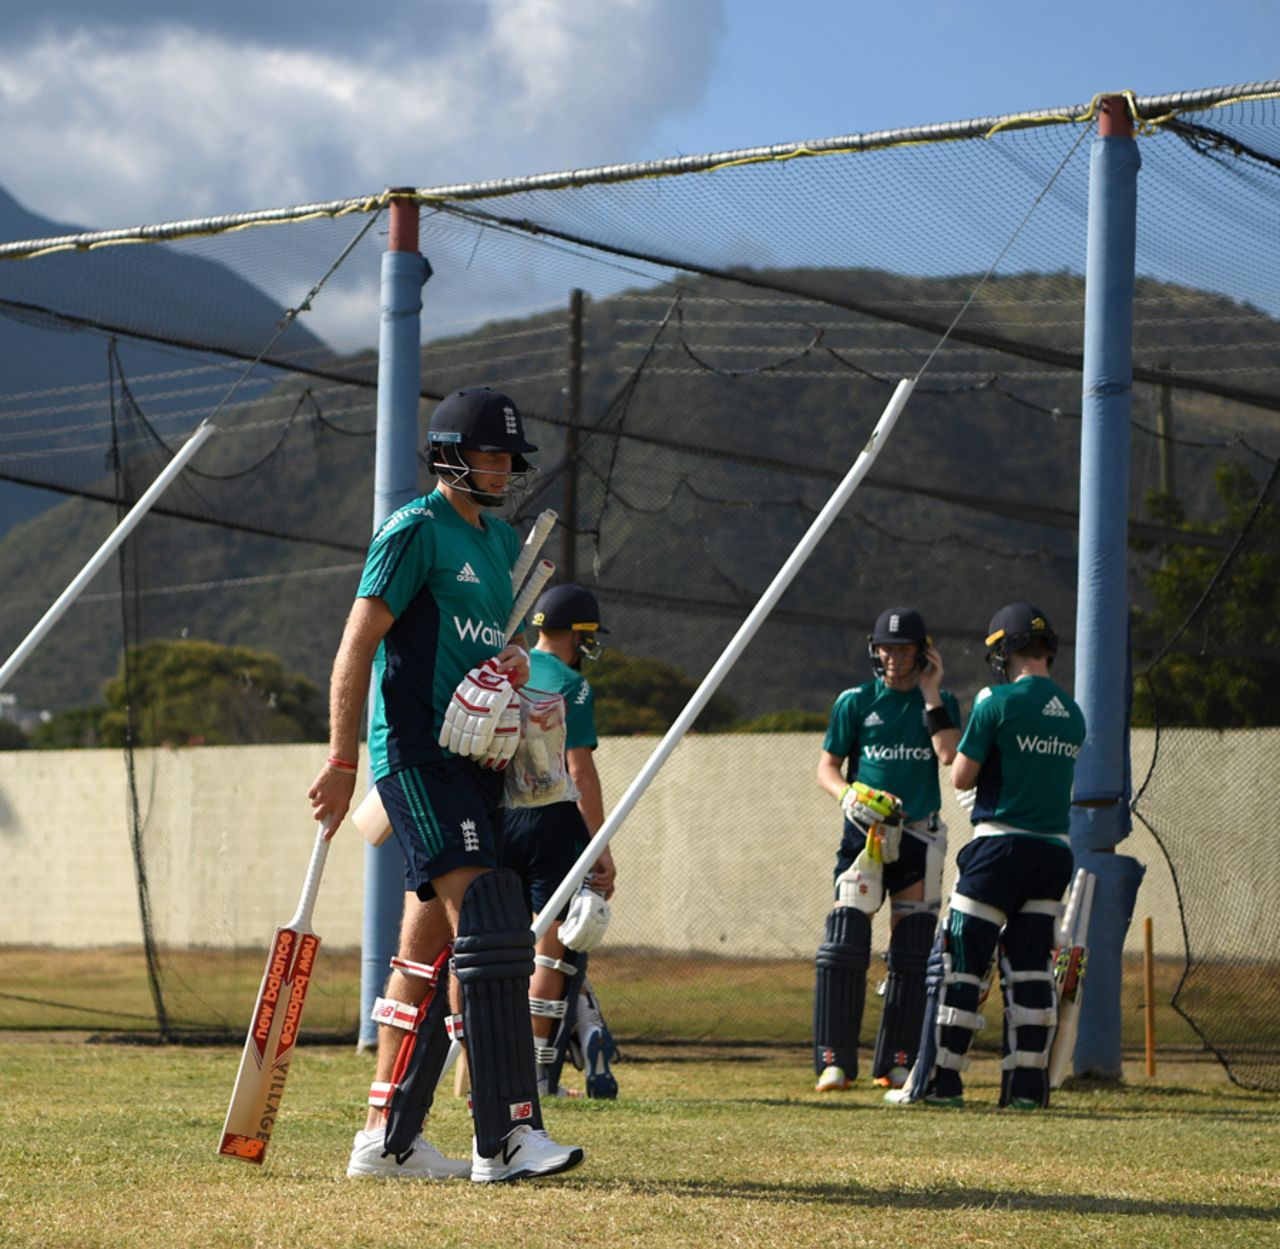 Joe Root prepares to bat during a nets session at Warner Park, St Kitts, February 23, 2017